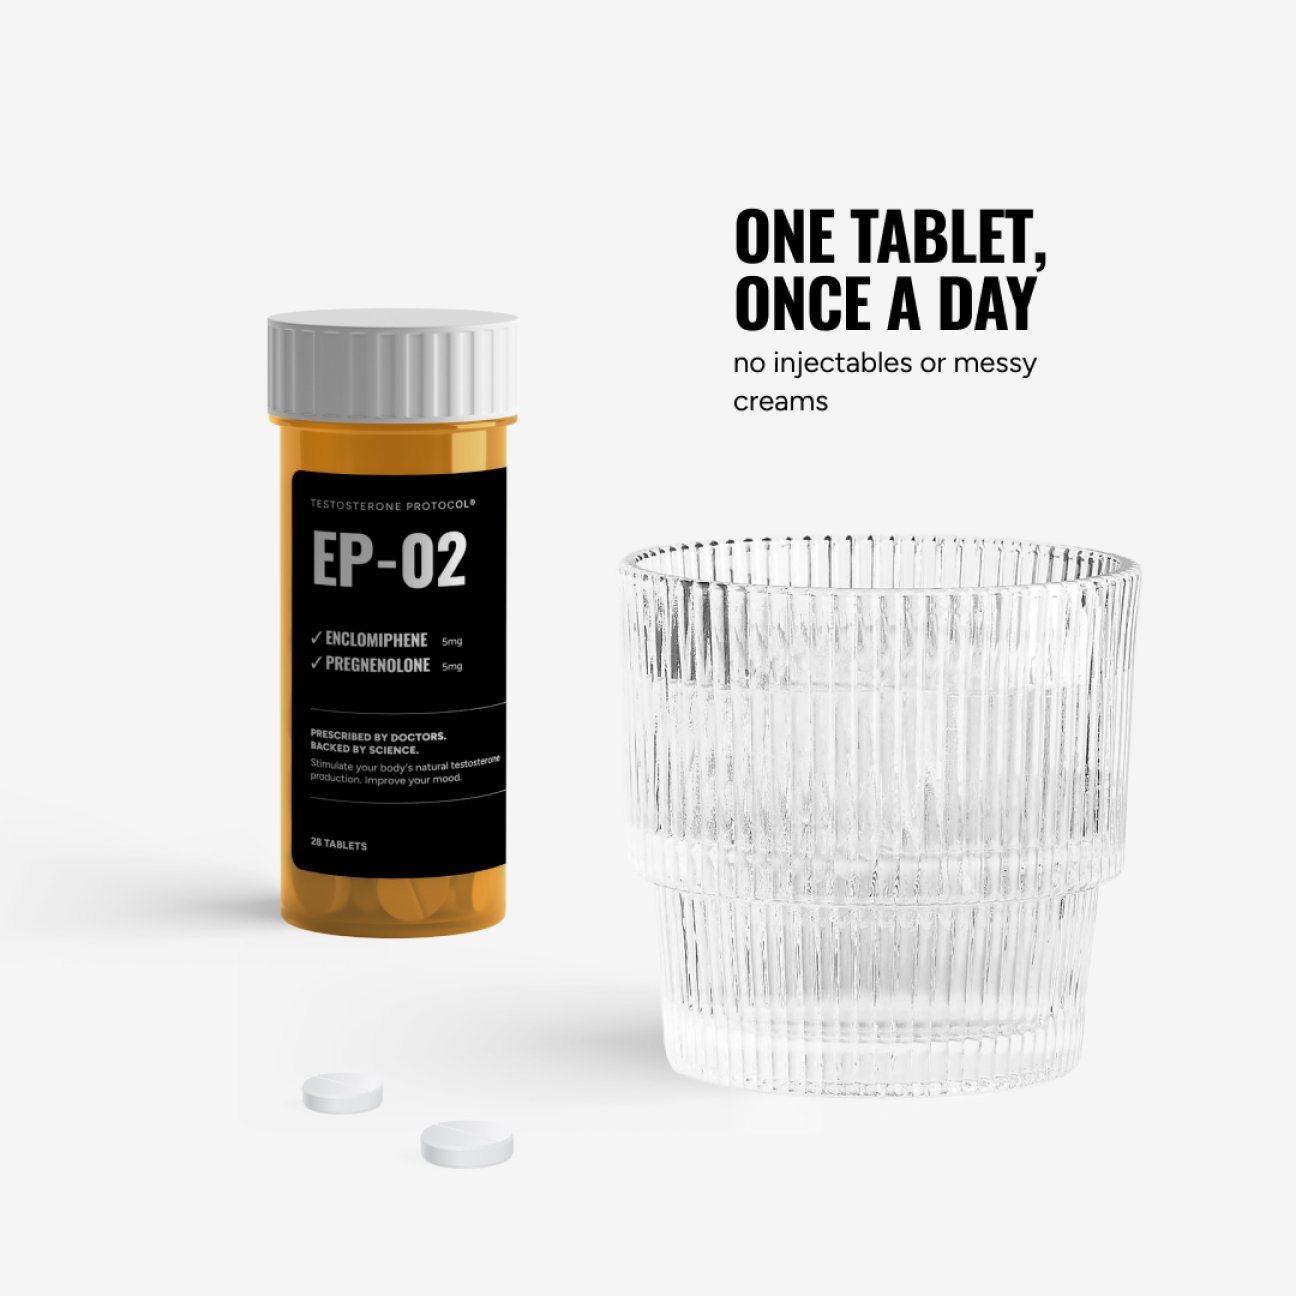 One tablet per day